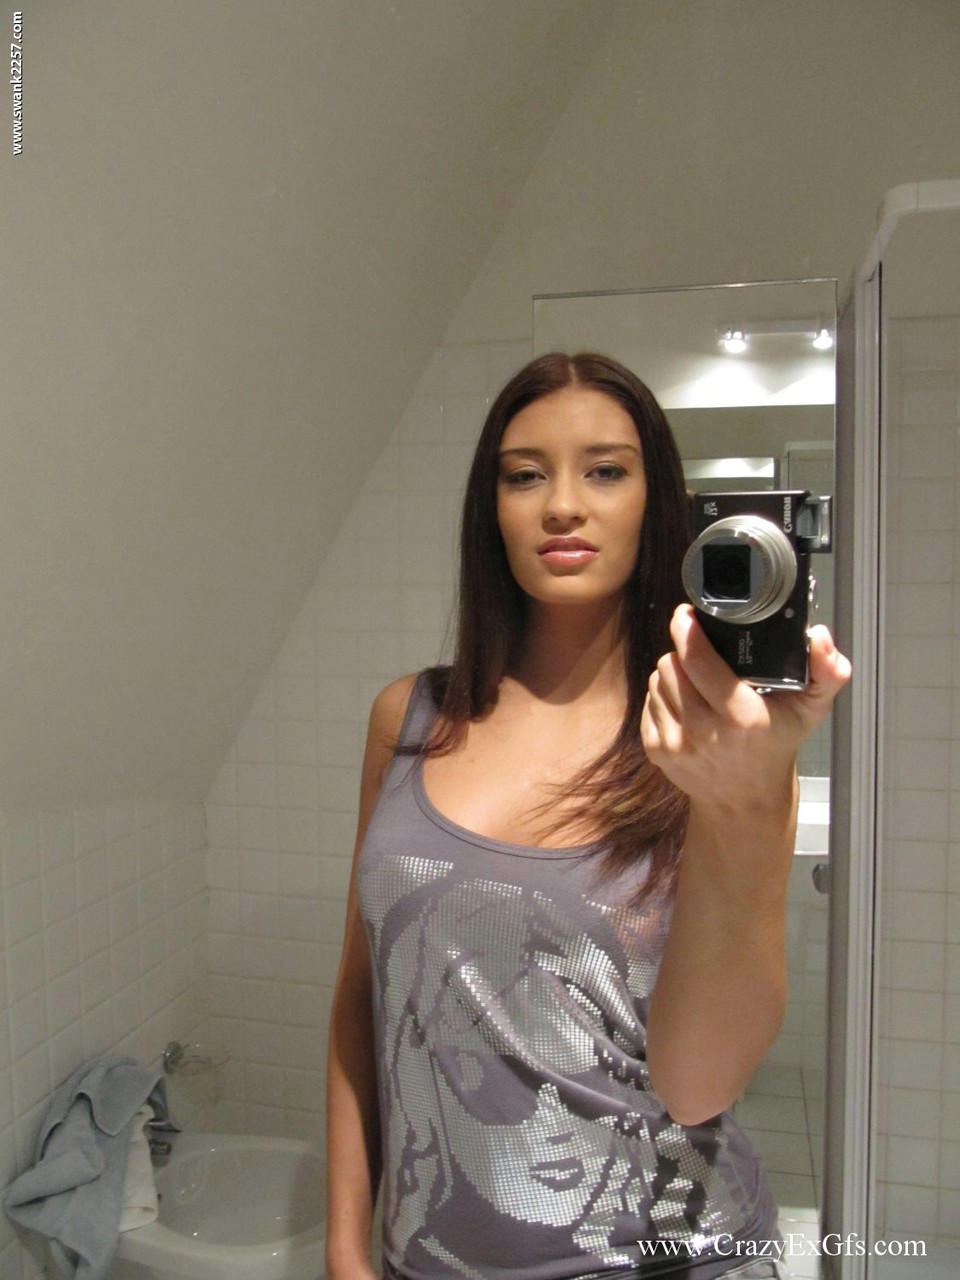 Amateur chick takes mirror selfies while stripping naked in bathroom image